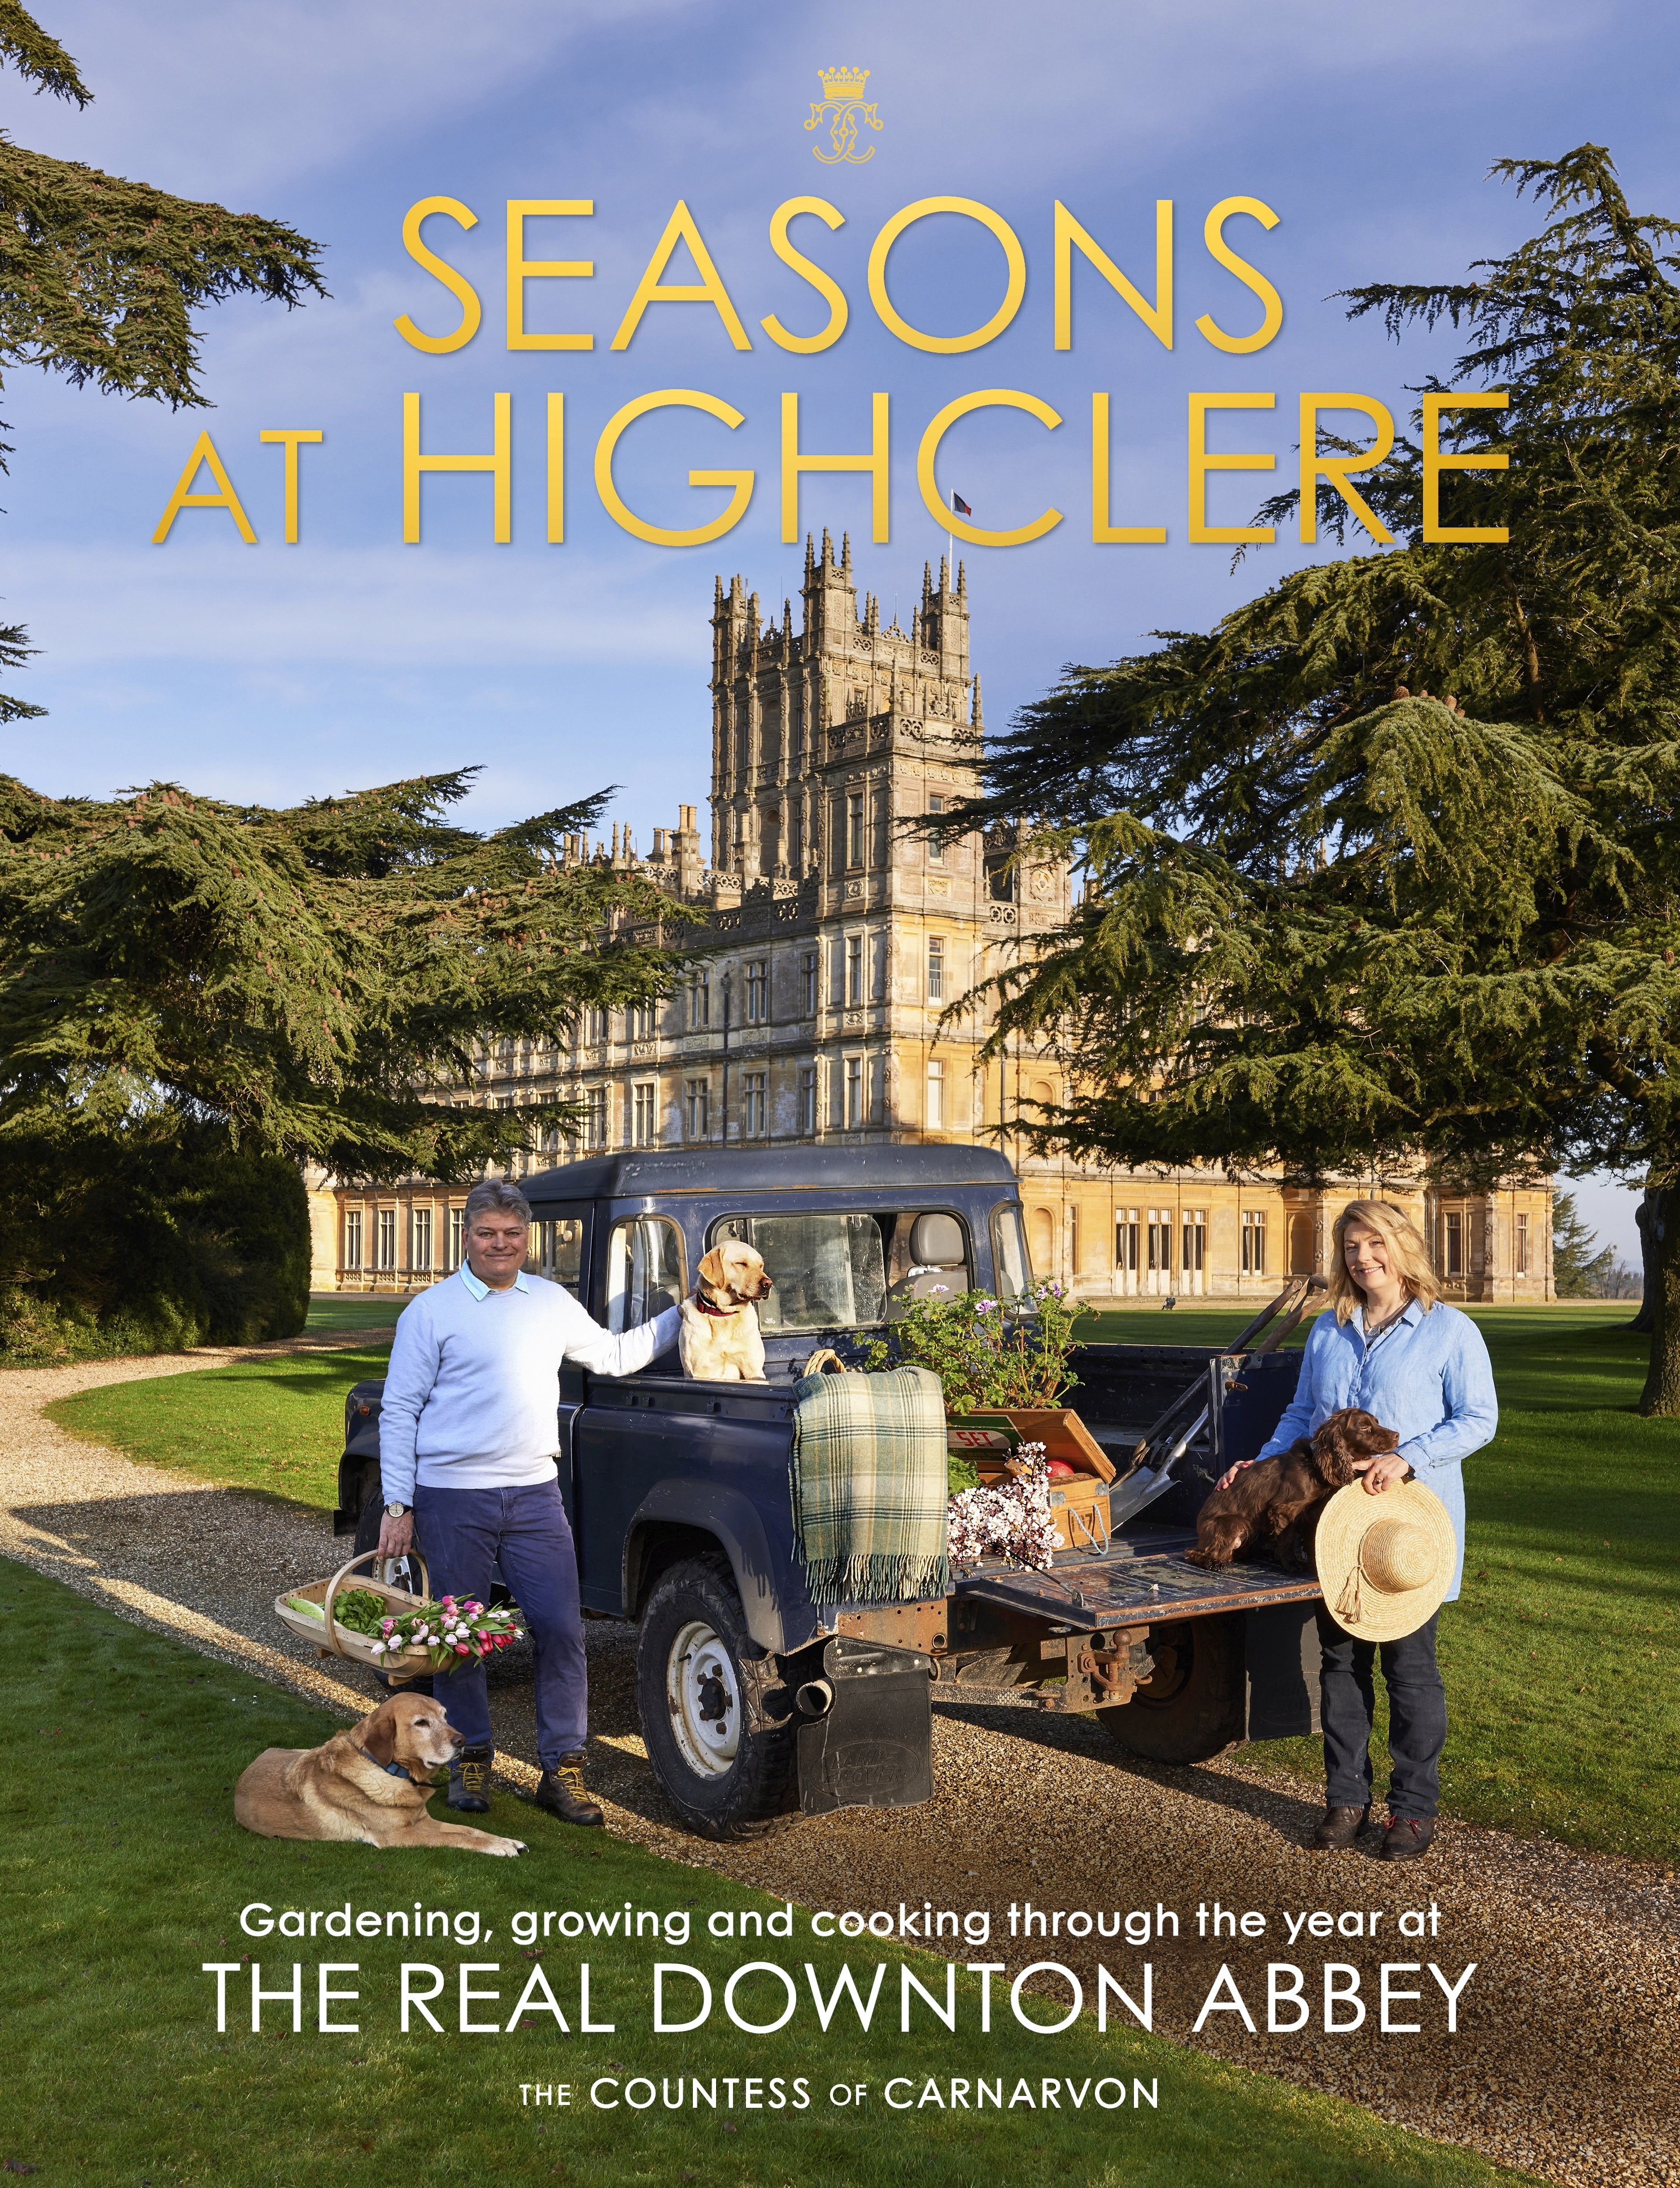 Book “Seasons at Highclere” by The Countess of Carnarvon — September 16, 2021